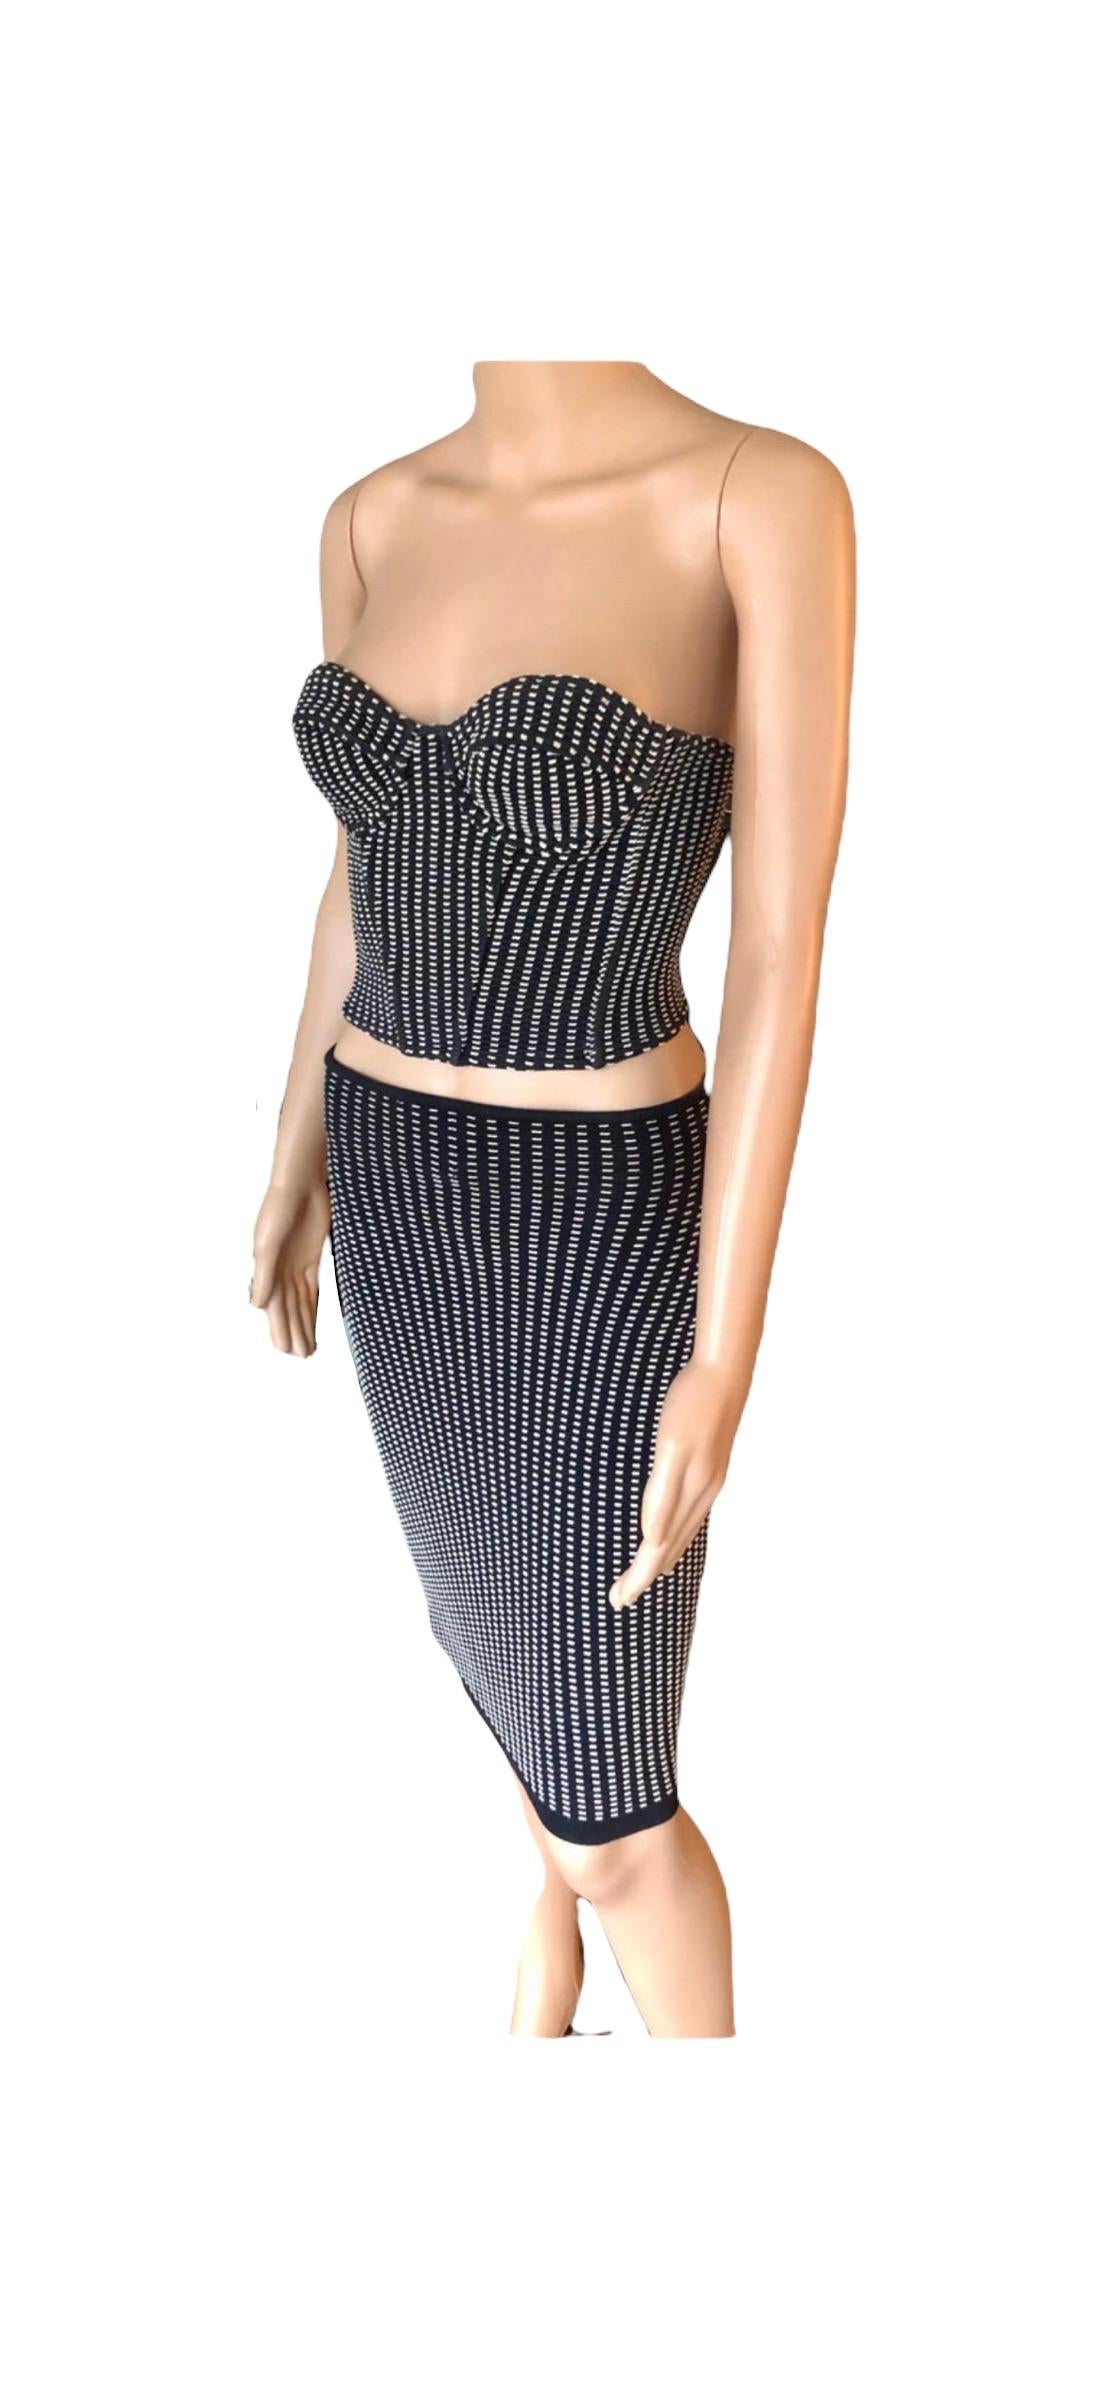 Azzedine Alaia S/S 1991 Vintage Skirt and Bustier Crop Top 2 Piece Set  3